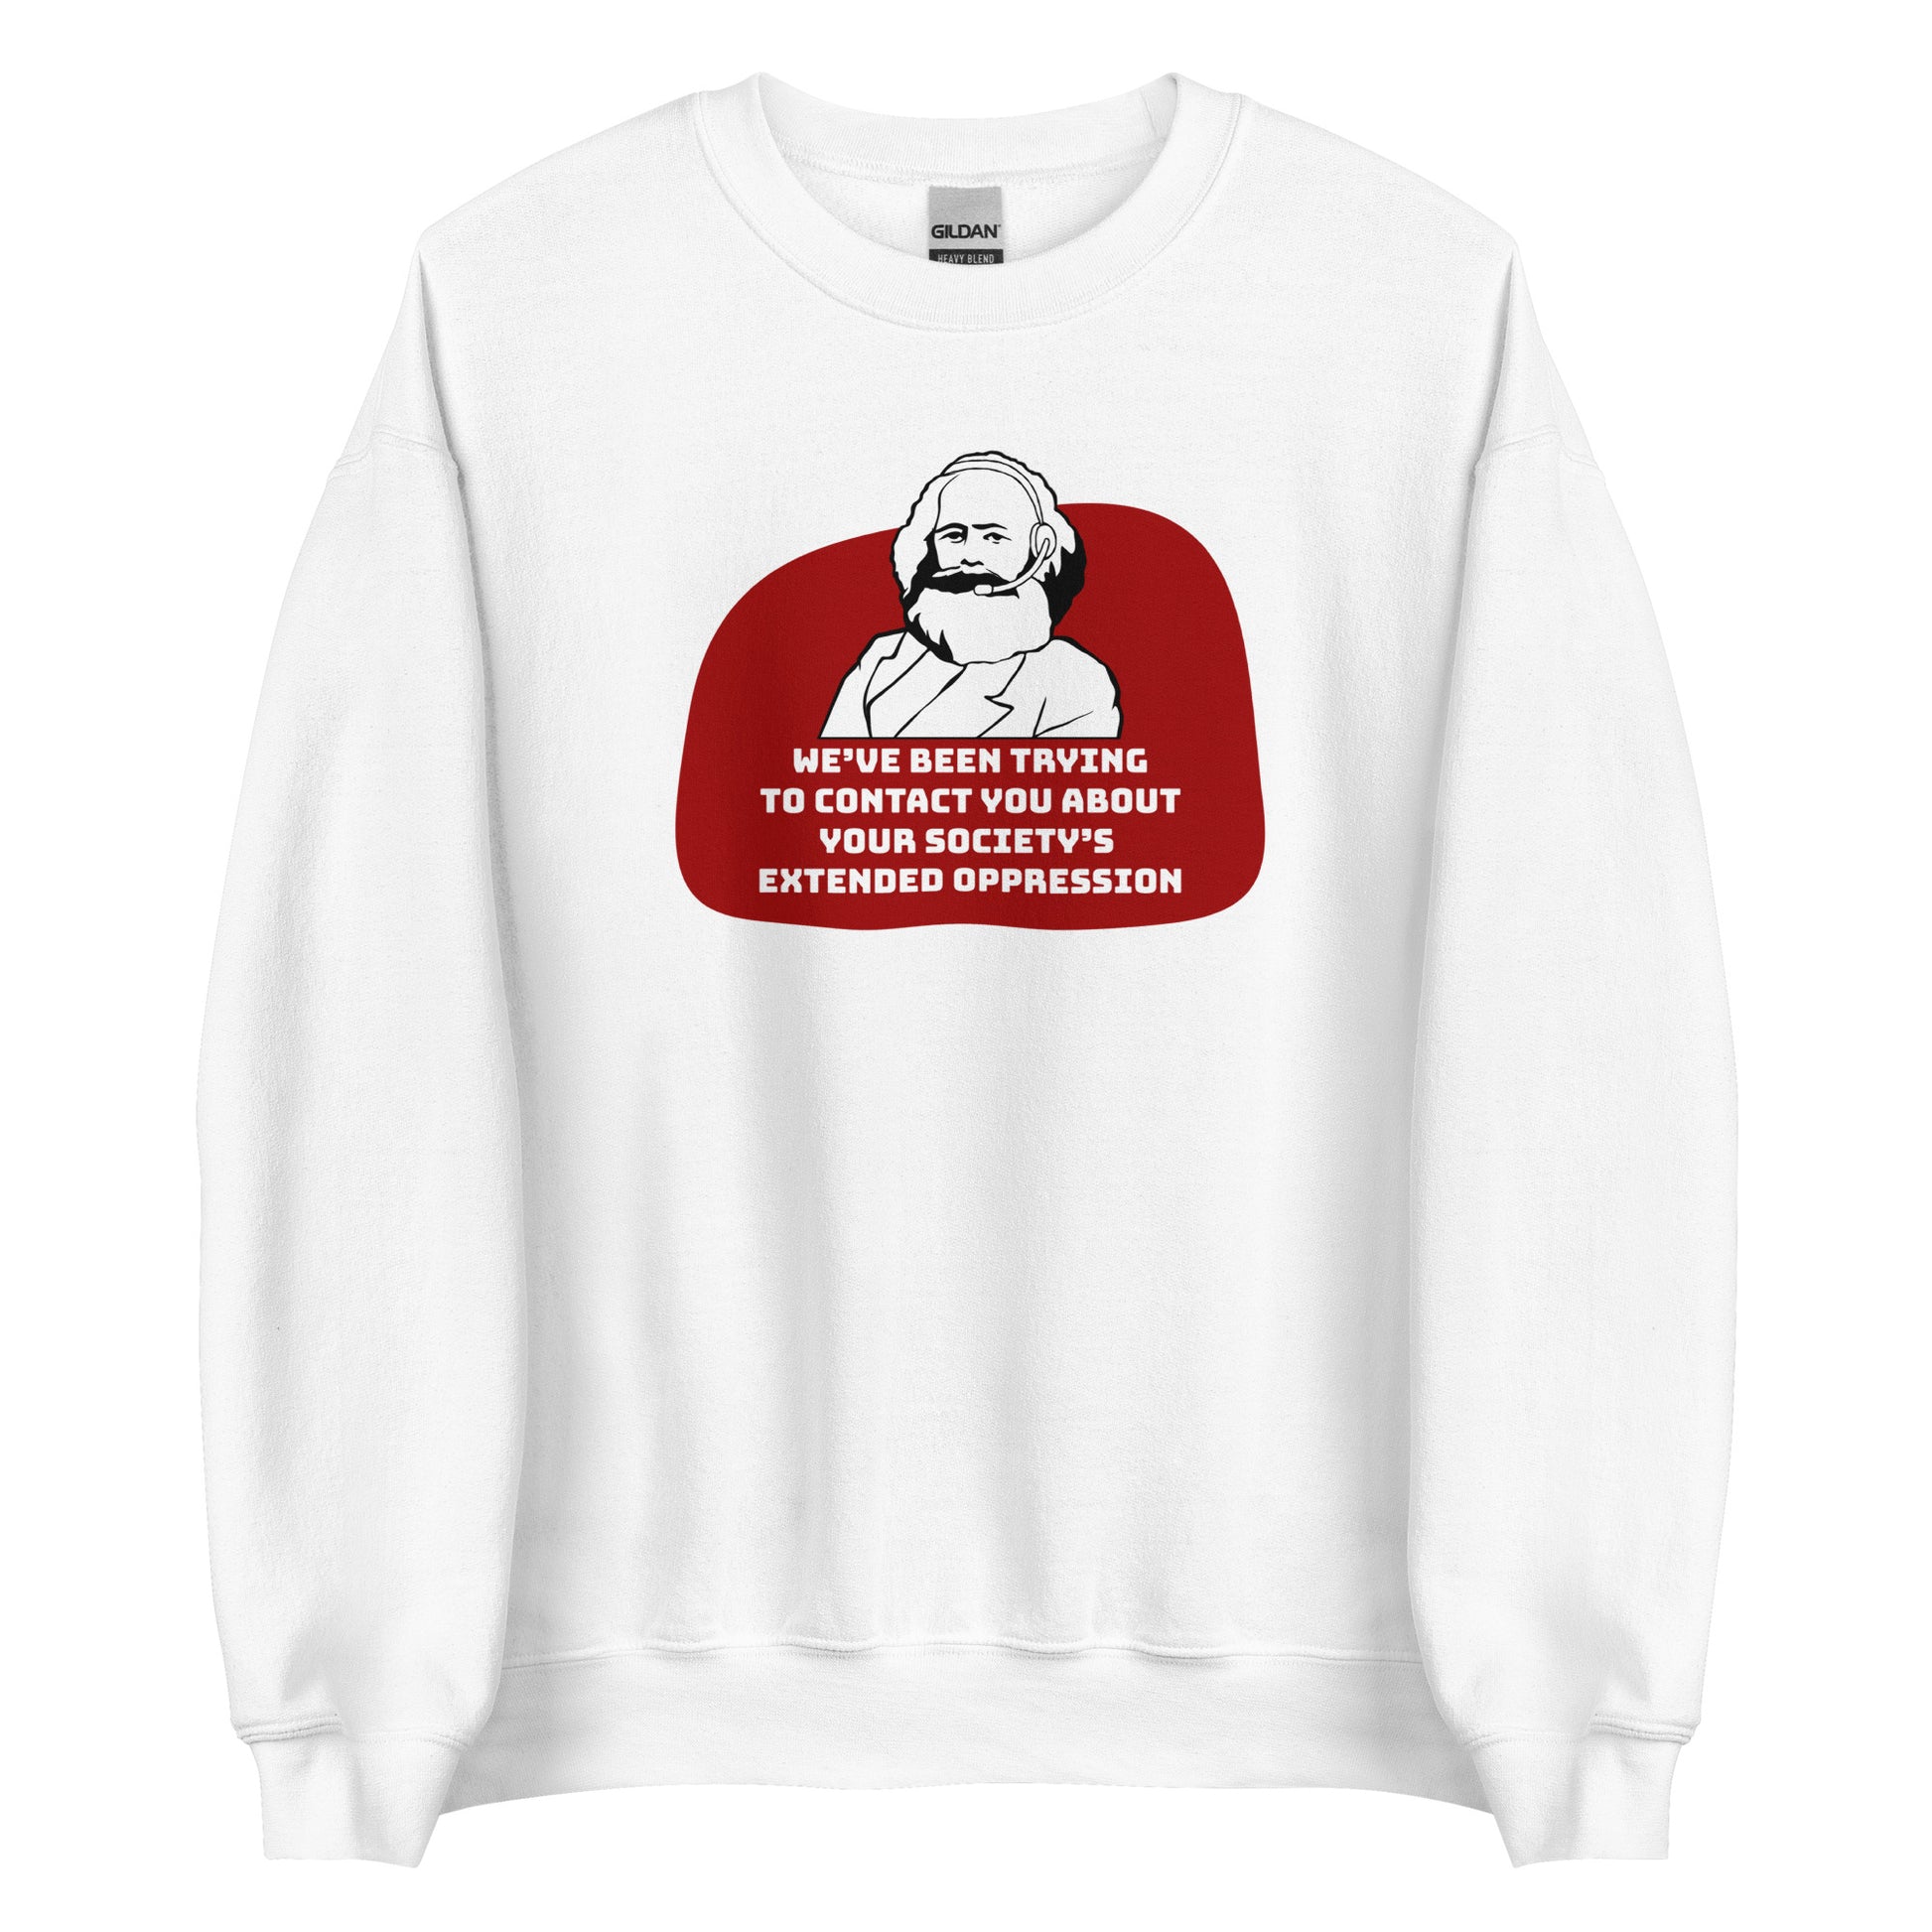 A white crewneck sweatshirt featuring a black and white illustration of Karl Marx wearing a telemarketer headset. Text beneath Marx reads "We've been trying to contact you about your society's extended oppression." in a blocky font.